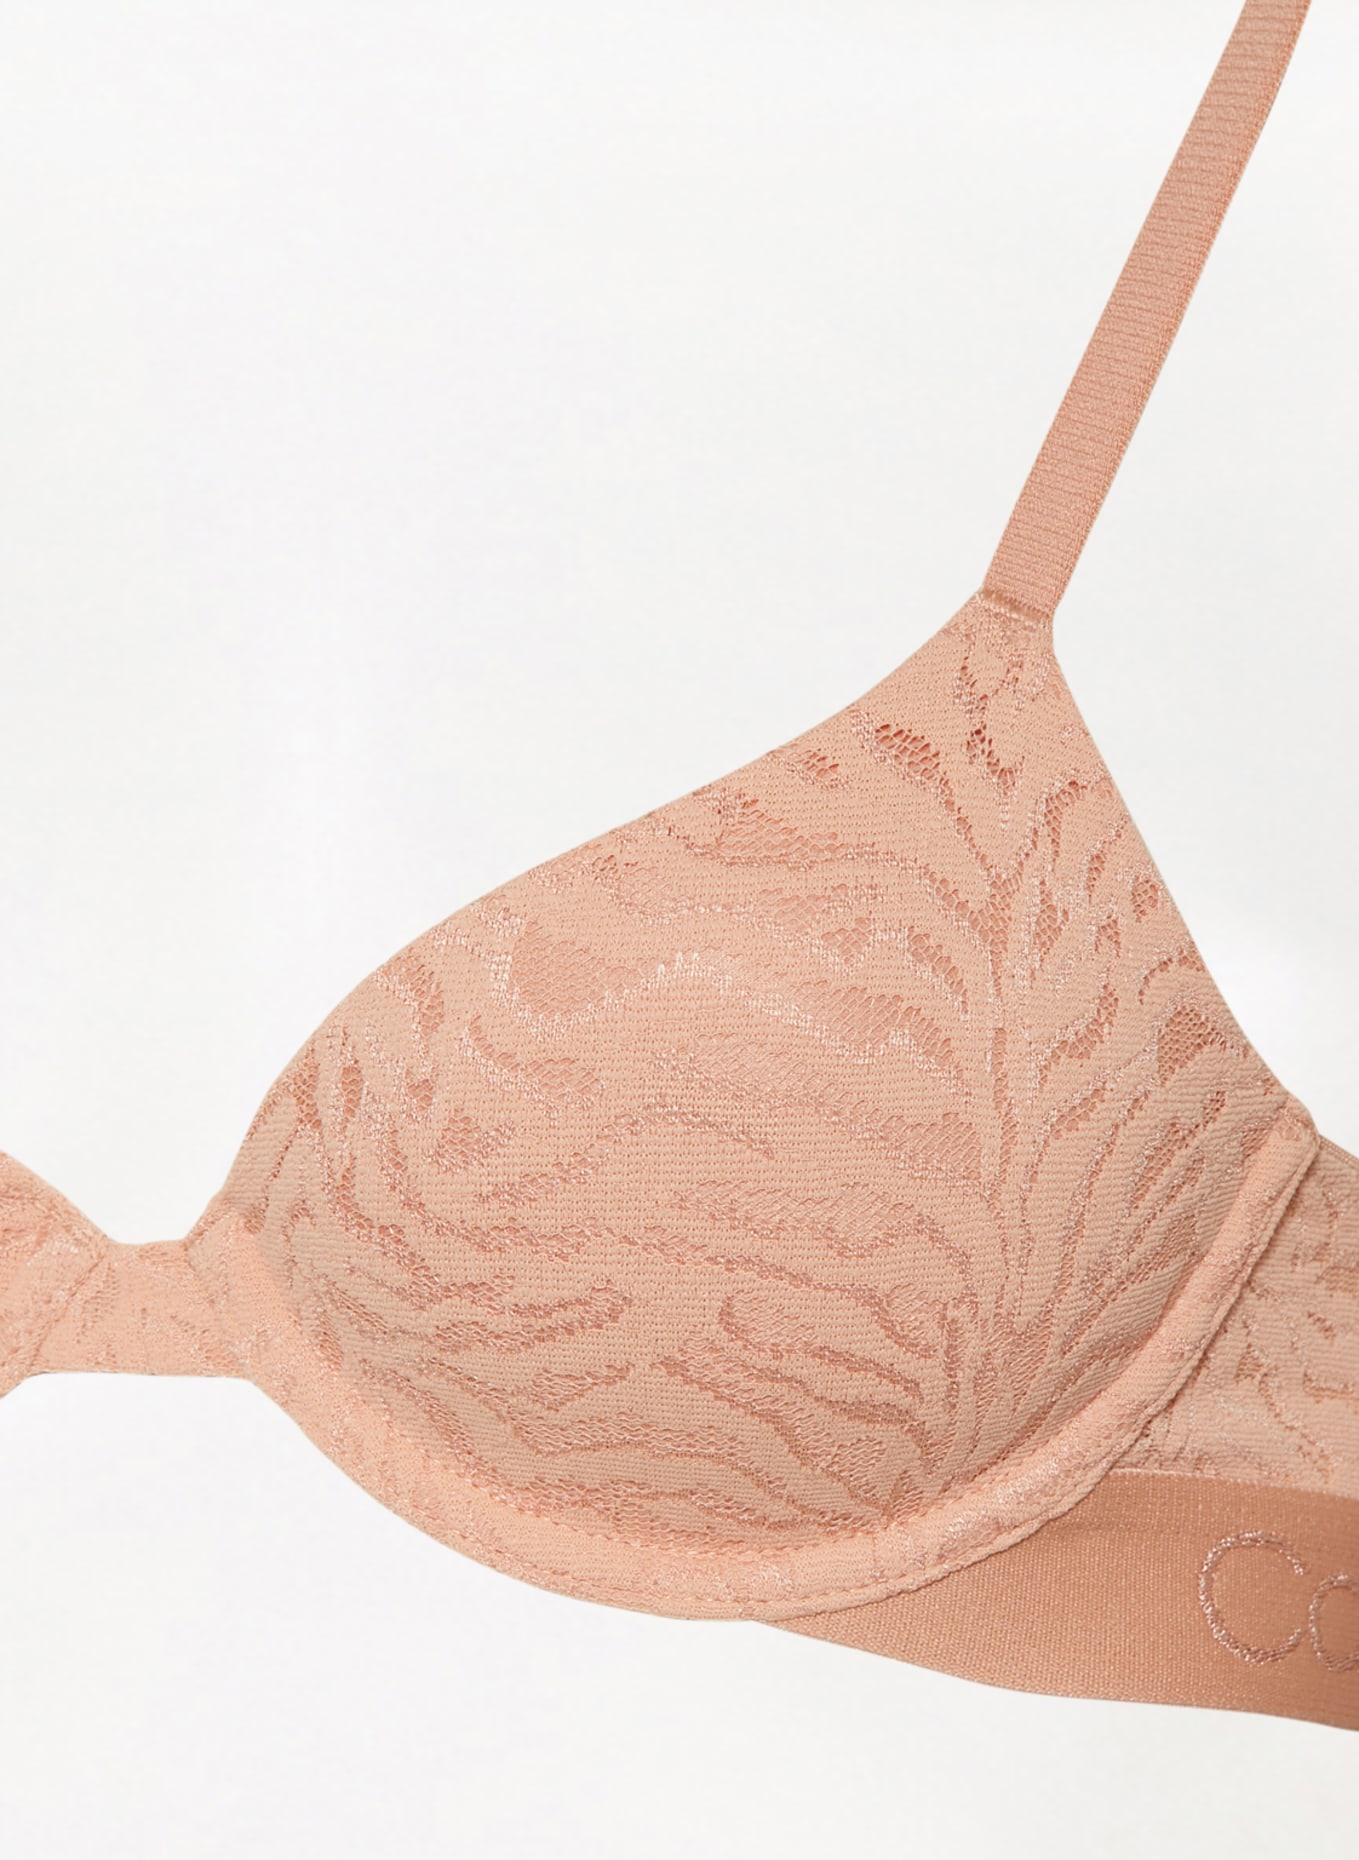 Calvin Klein Molded cup bra INTRINSIC in nude